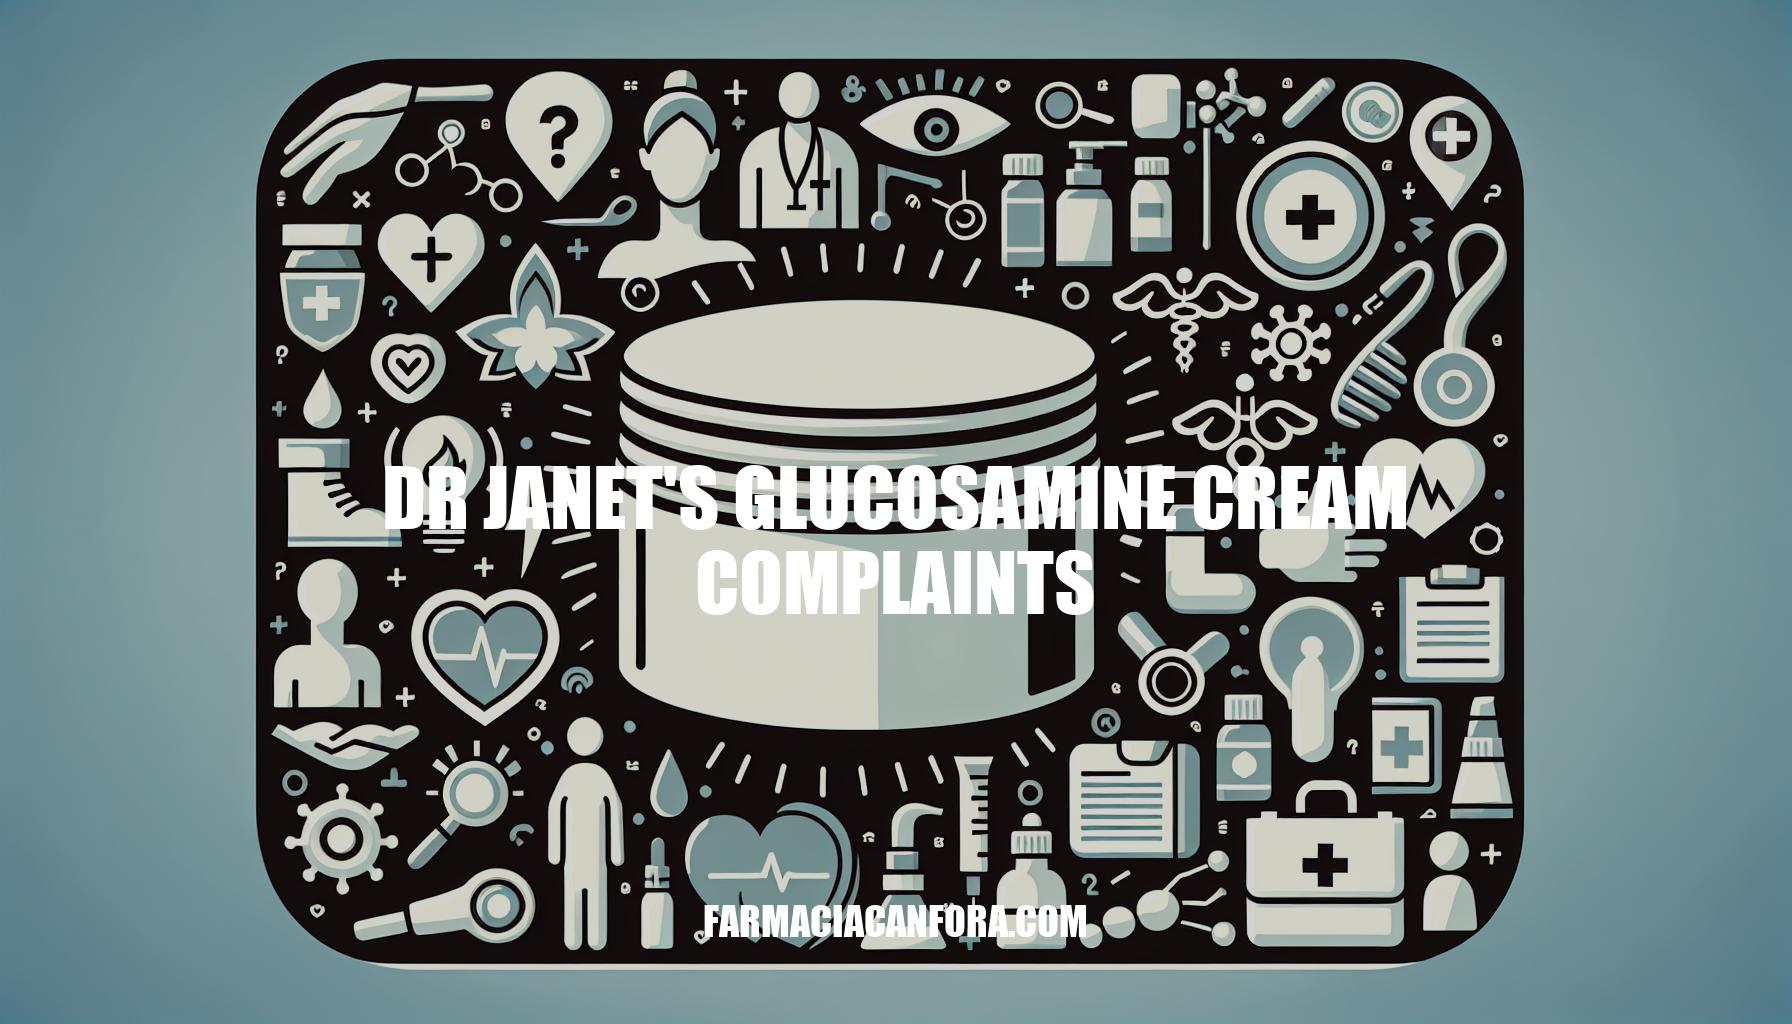 Dr. Janet's Glucosamine Cream Complaints: Uncovering the Issues